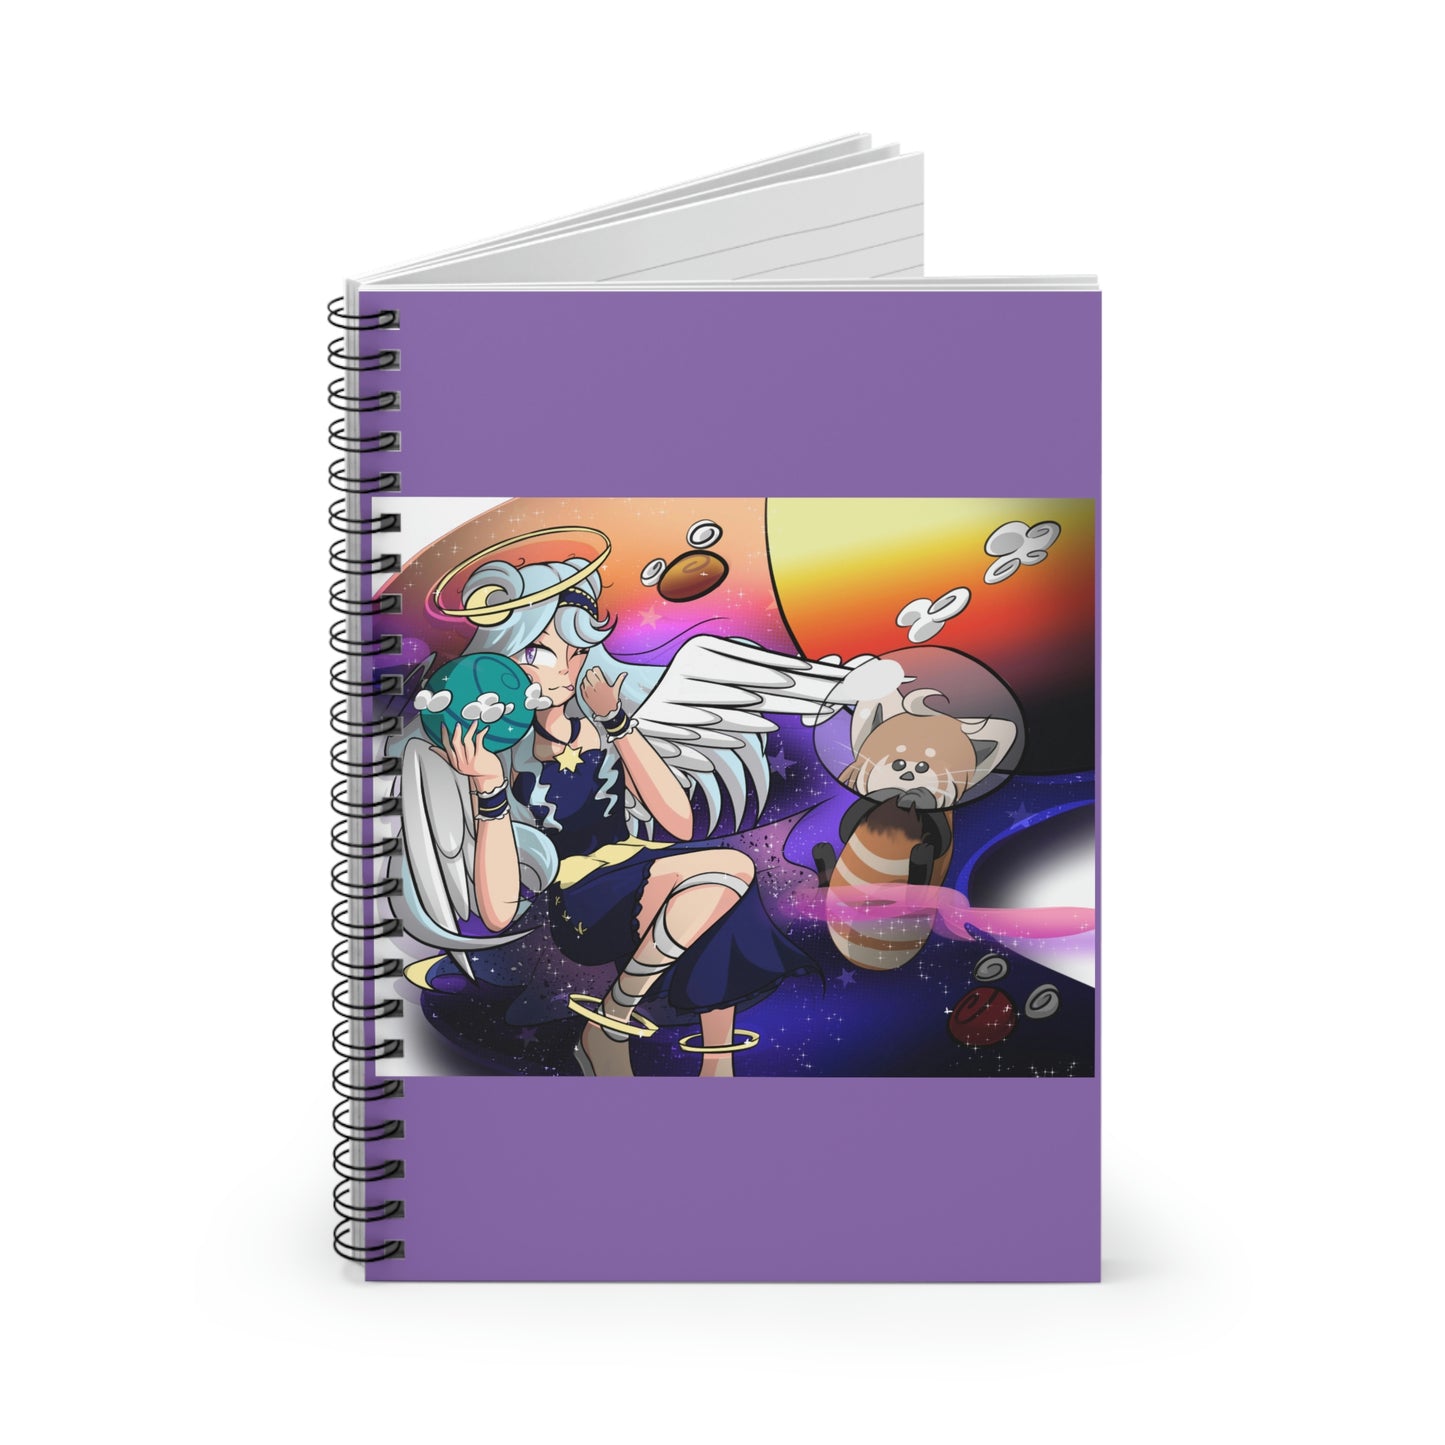 Angel of the universe Spiral Notebook - Ruled Line